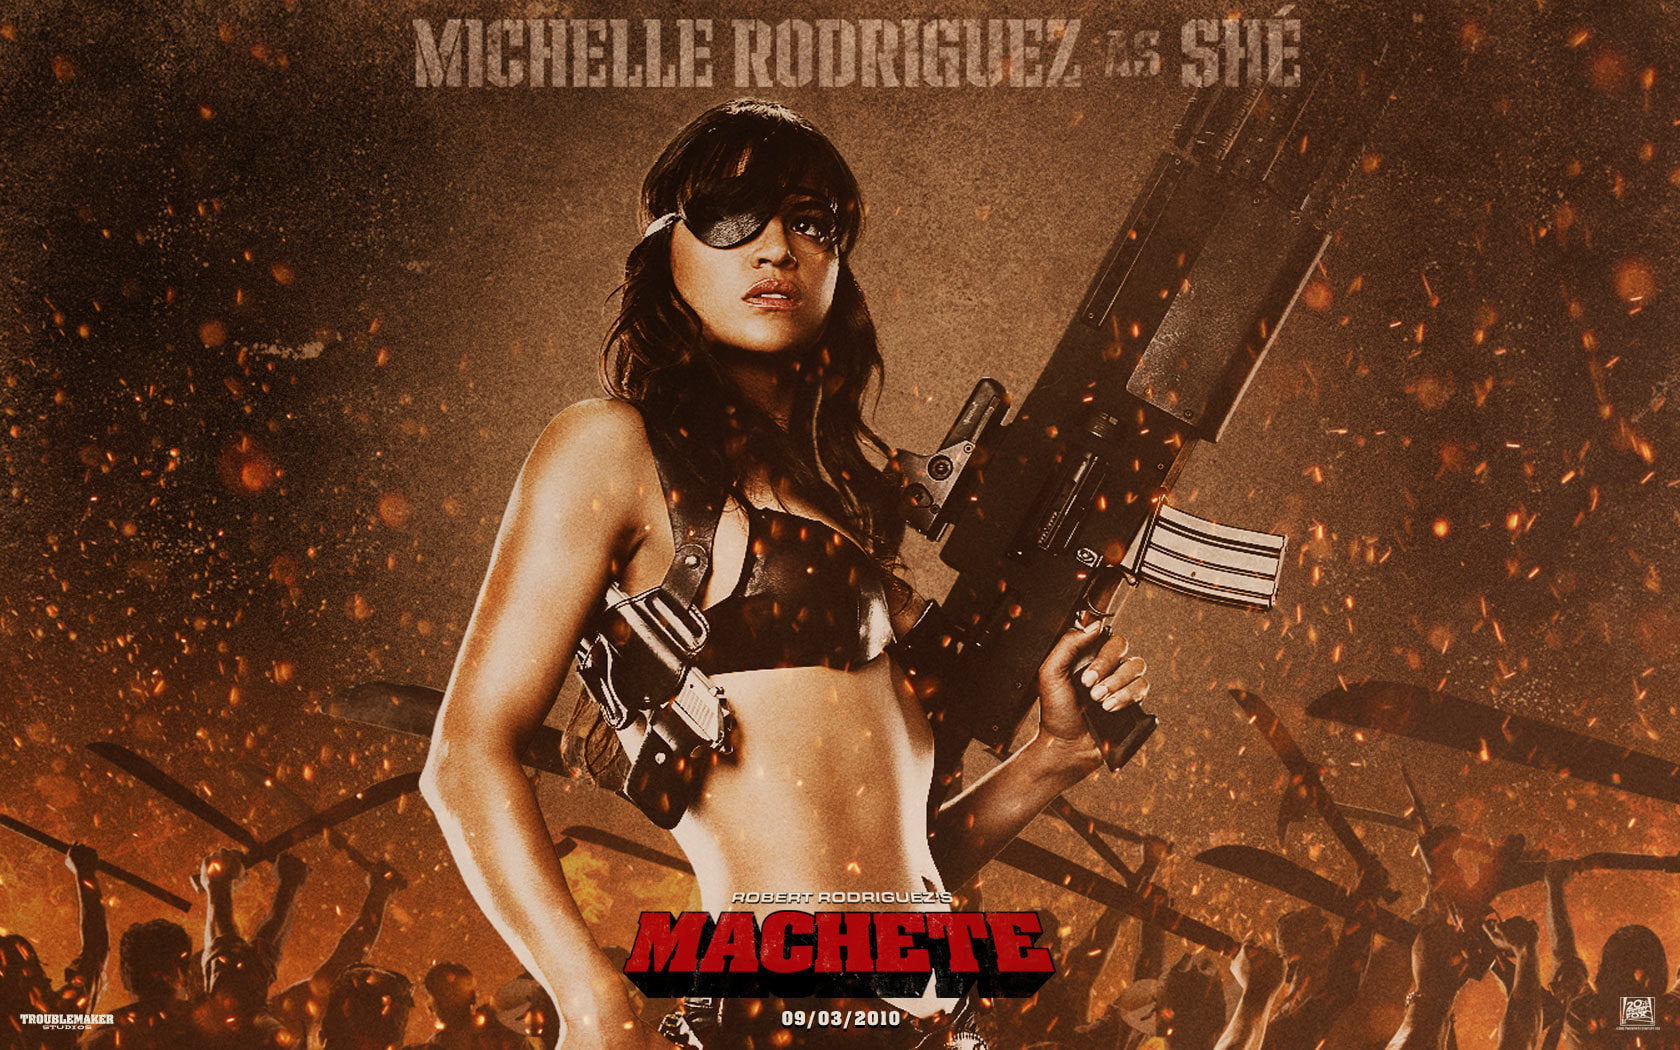 Michelle Rodriguez as She, Machete, fashion, young adult, glasses